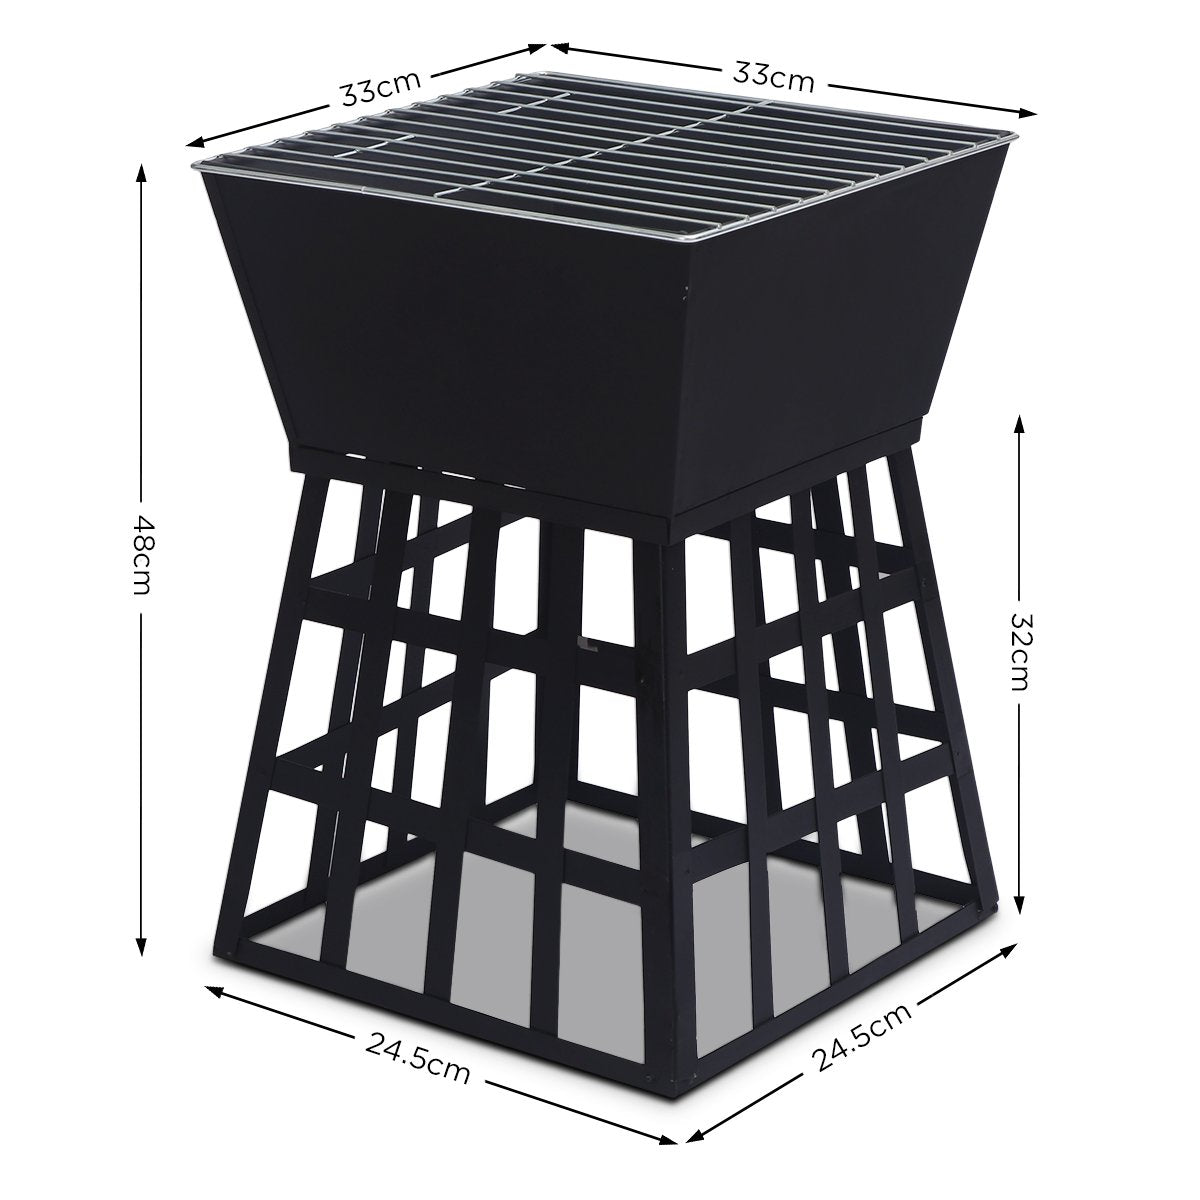 Wallaroo Outdoor Fire Pit for BBQ, Grilling, Cooking, Camping- Portable Brazier with Reversible Stand for Backyard - SILBERSHELL